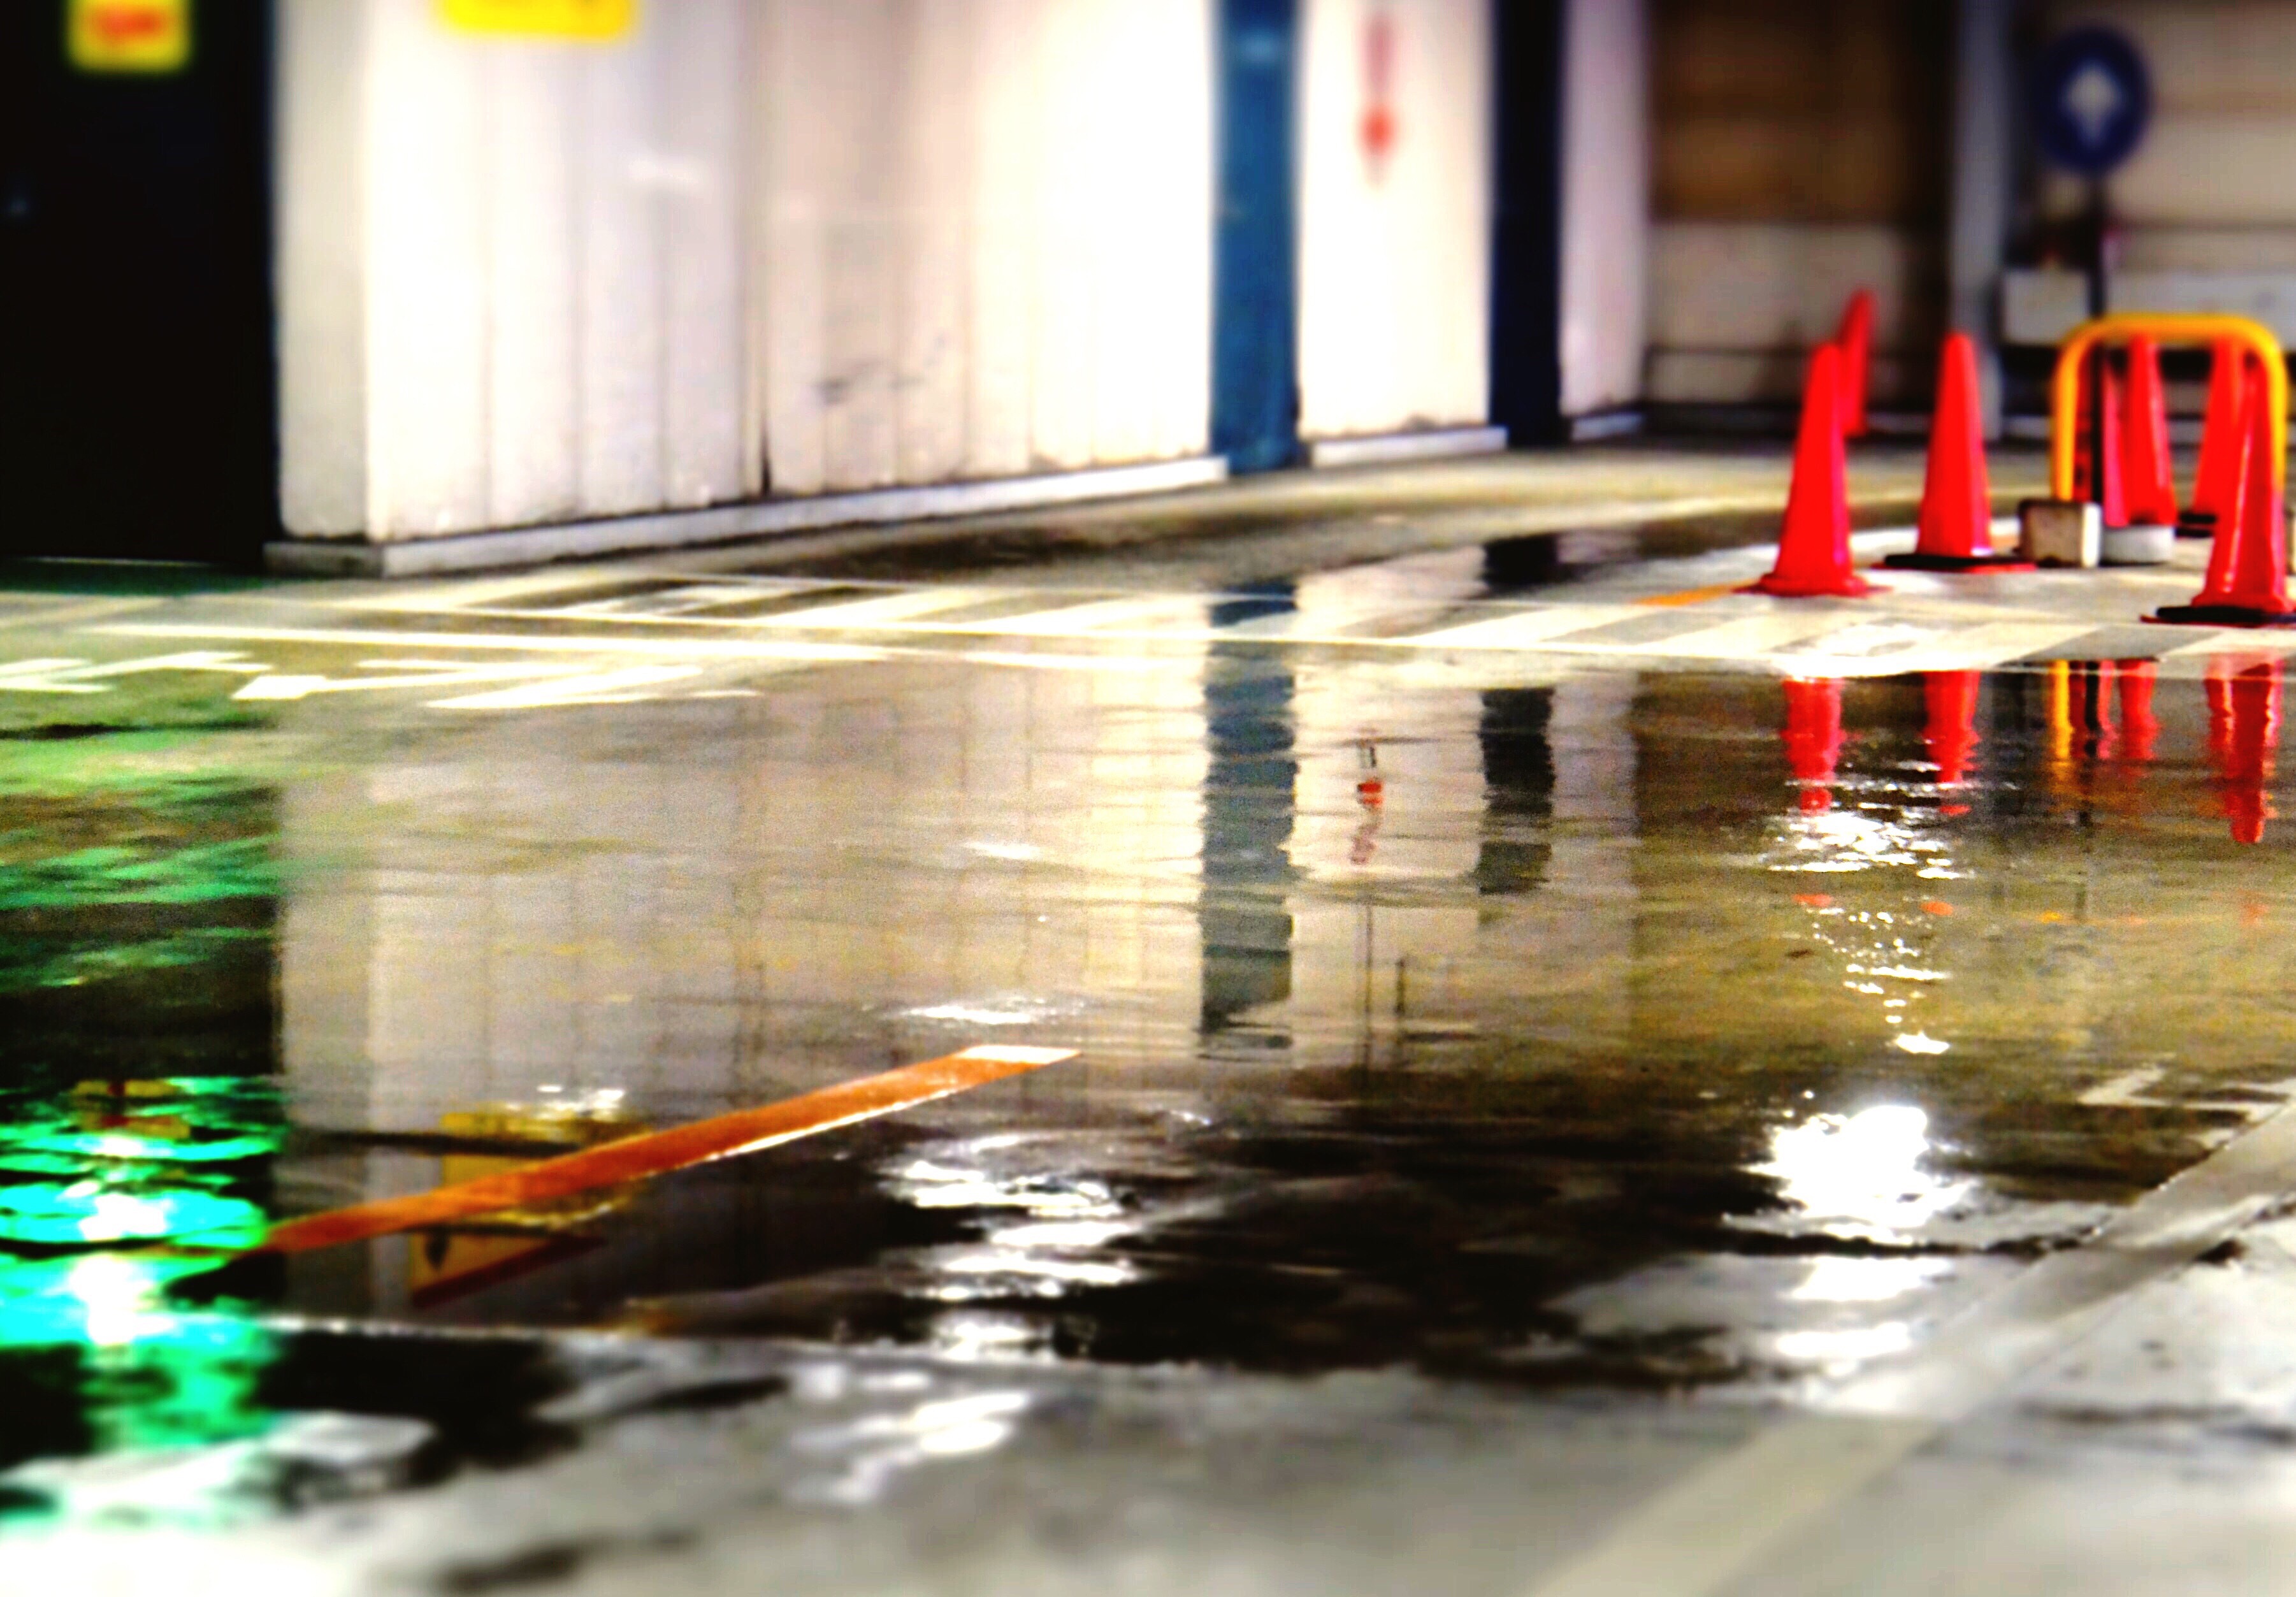 Flooded water reflection on the ground of parking lot 2023 11 27 05 06 18 utc
